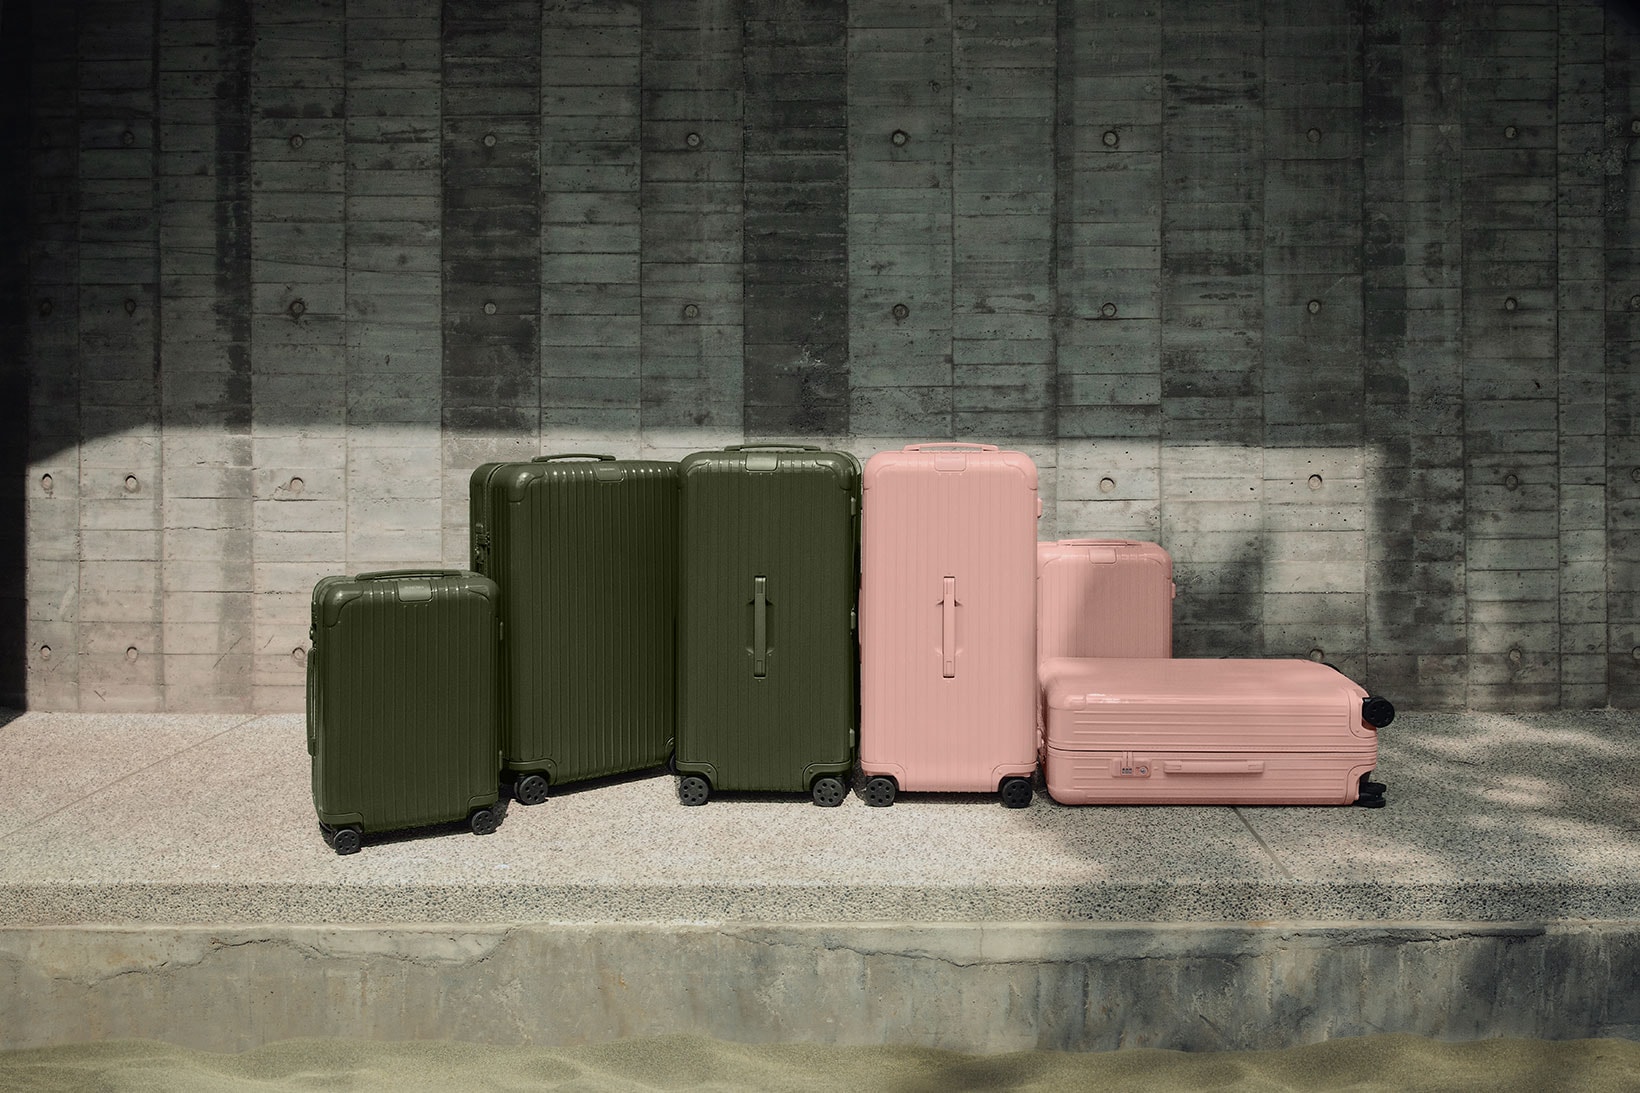 RIMOWA Launches iPhone 13 Pro and Pro Max Phone Covers